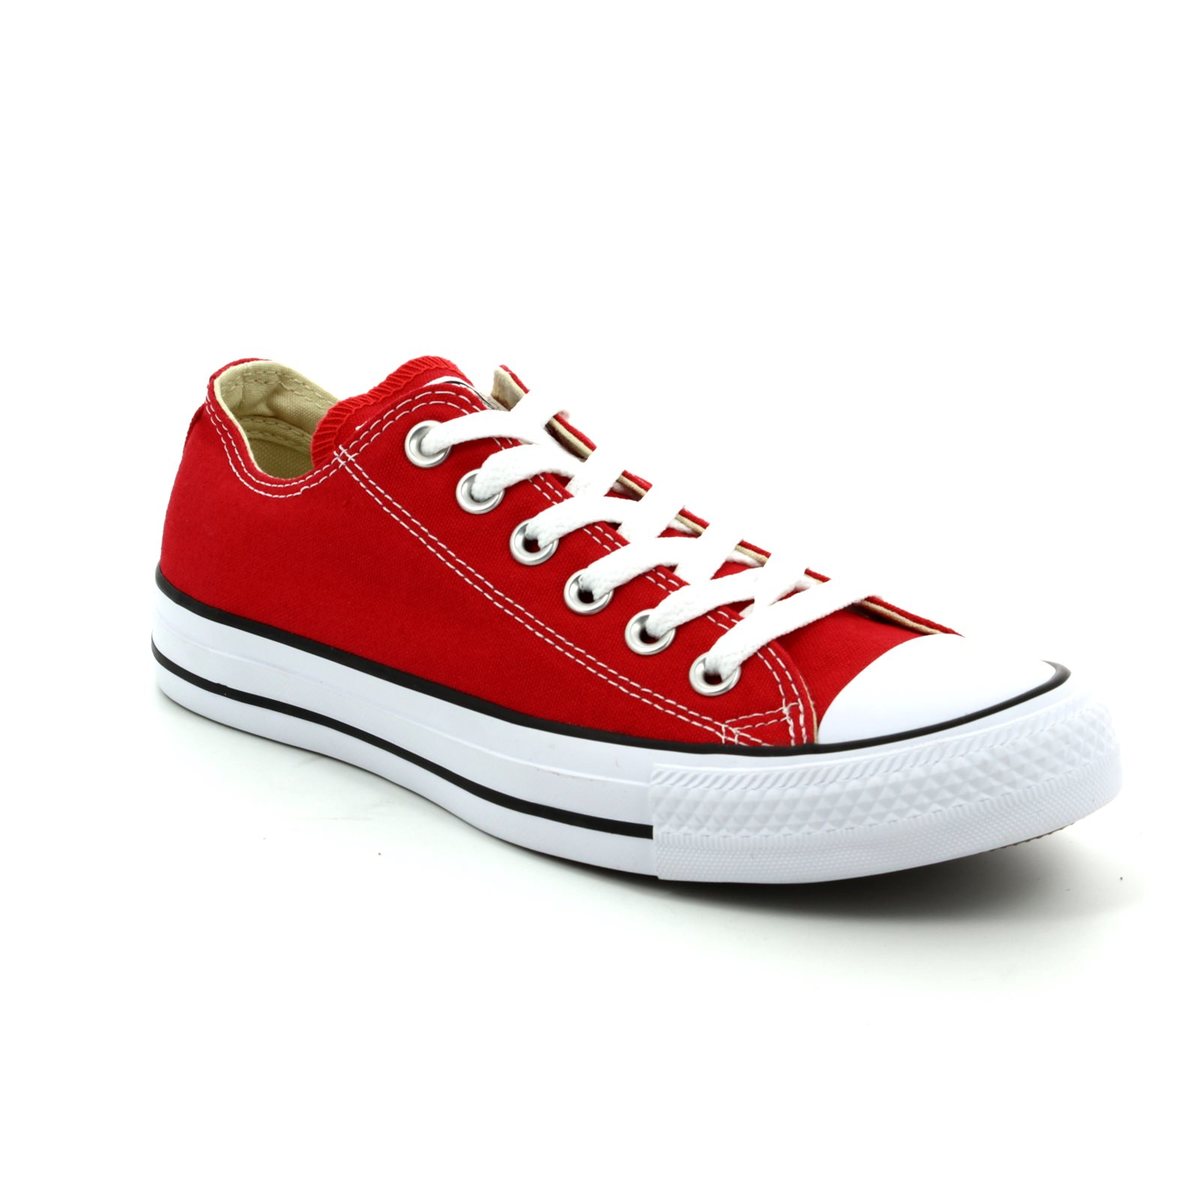 all star ox red